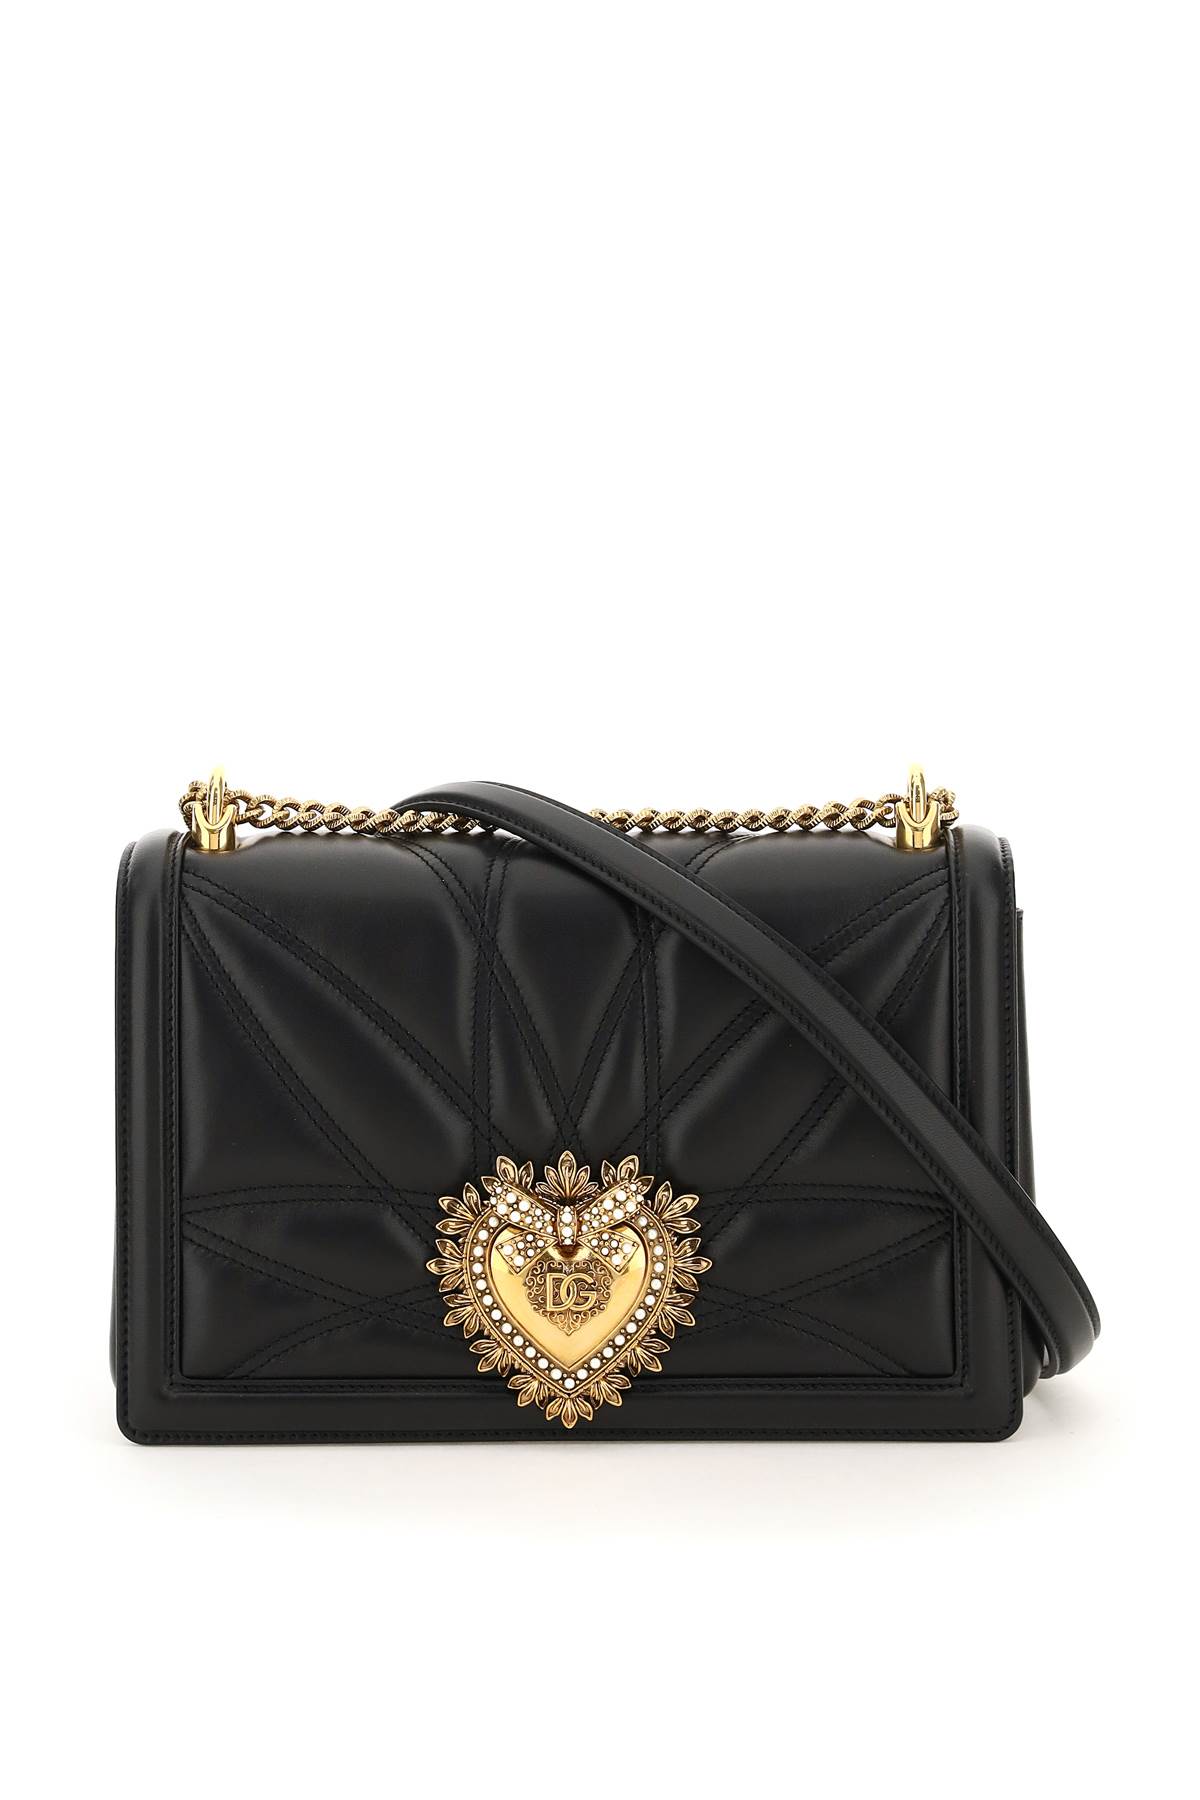 DOLCE & GABBANA LARGE DEVOTION BAG IN QUILTED NAPPA LEATHER